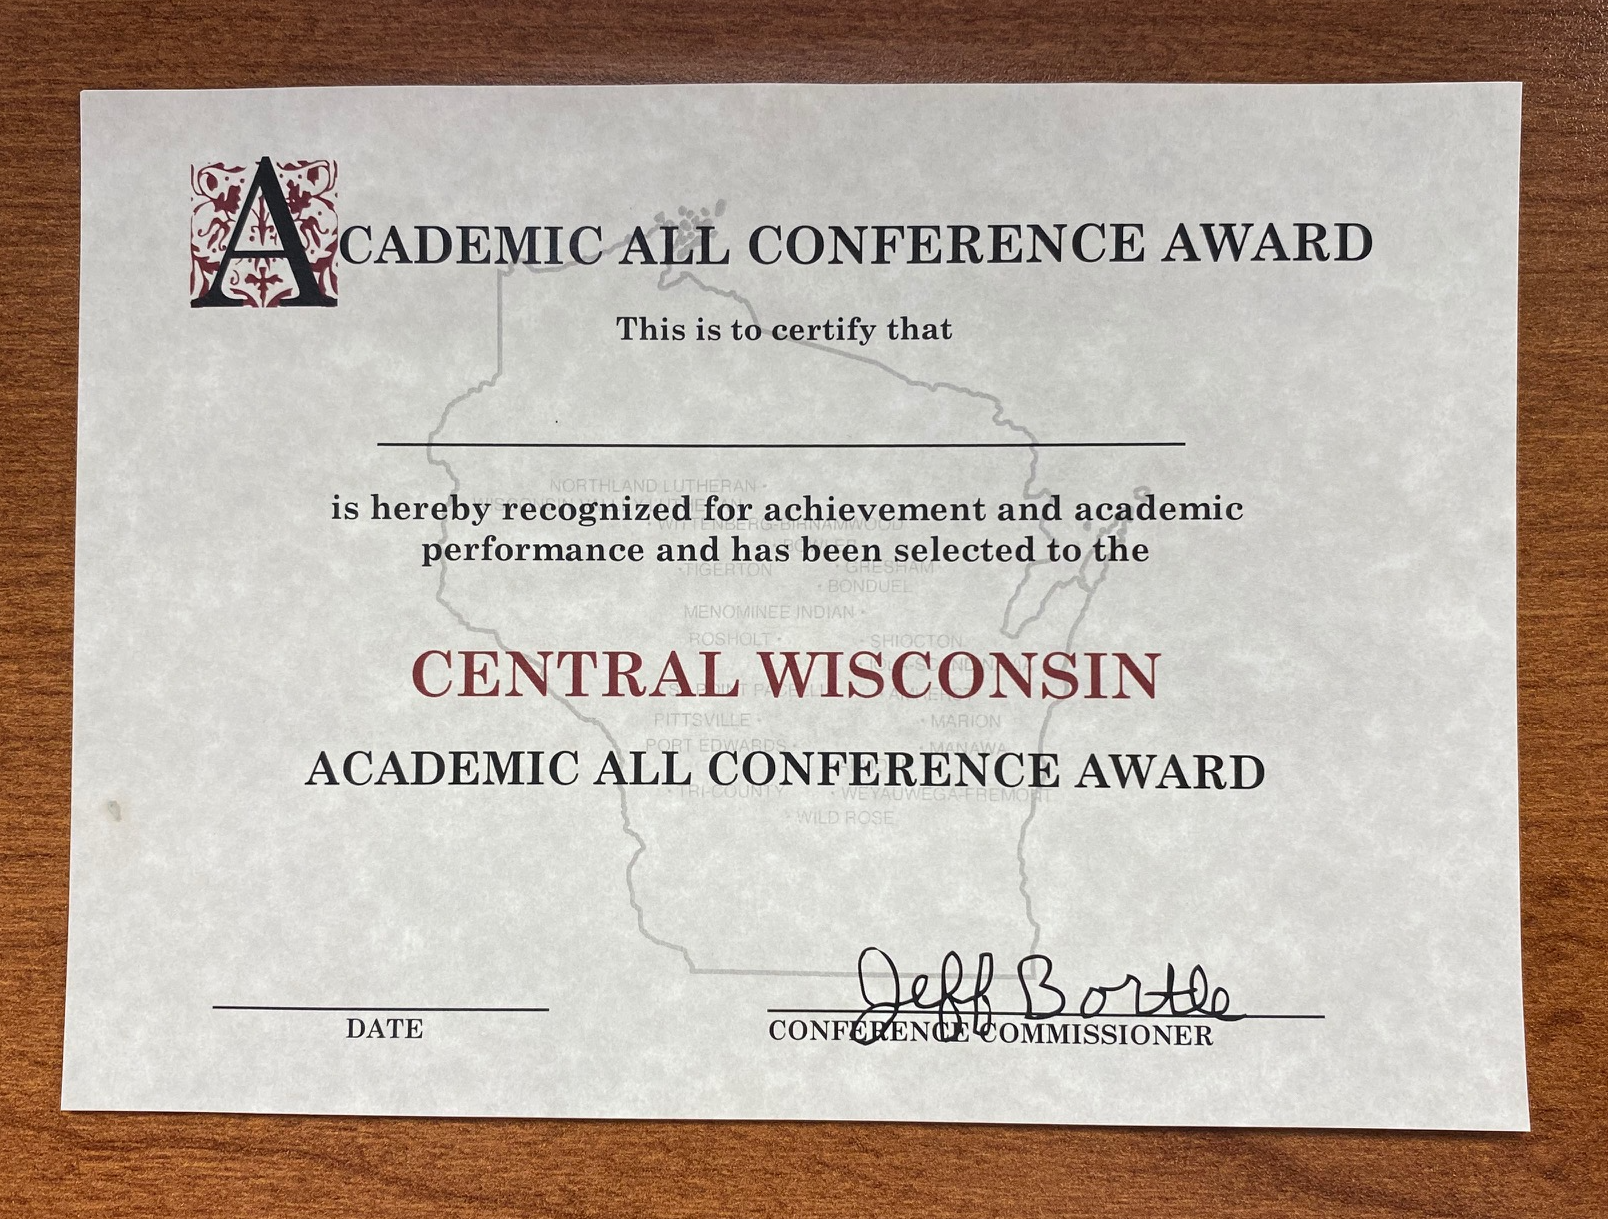 Academic All Conference Award certificate